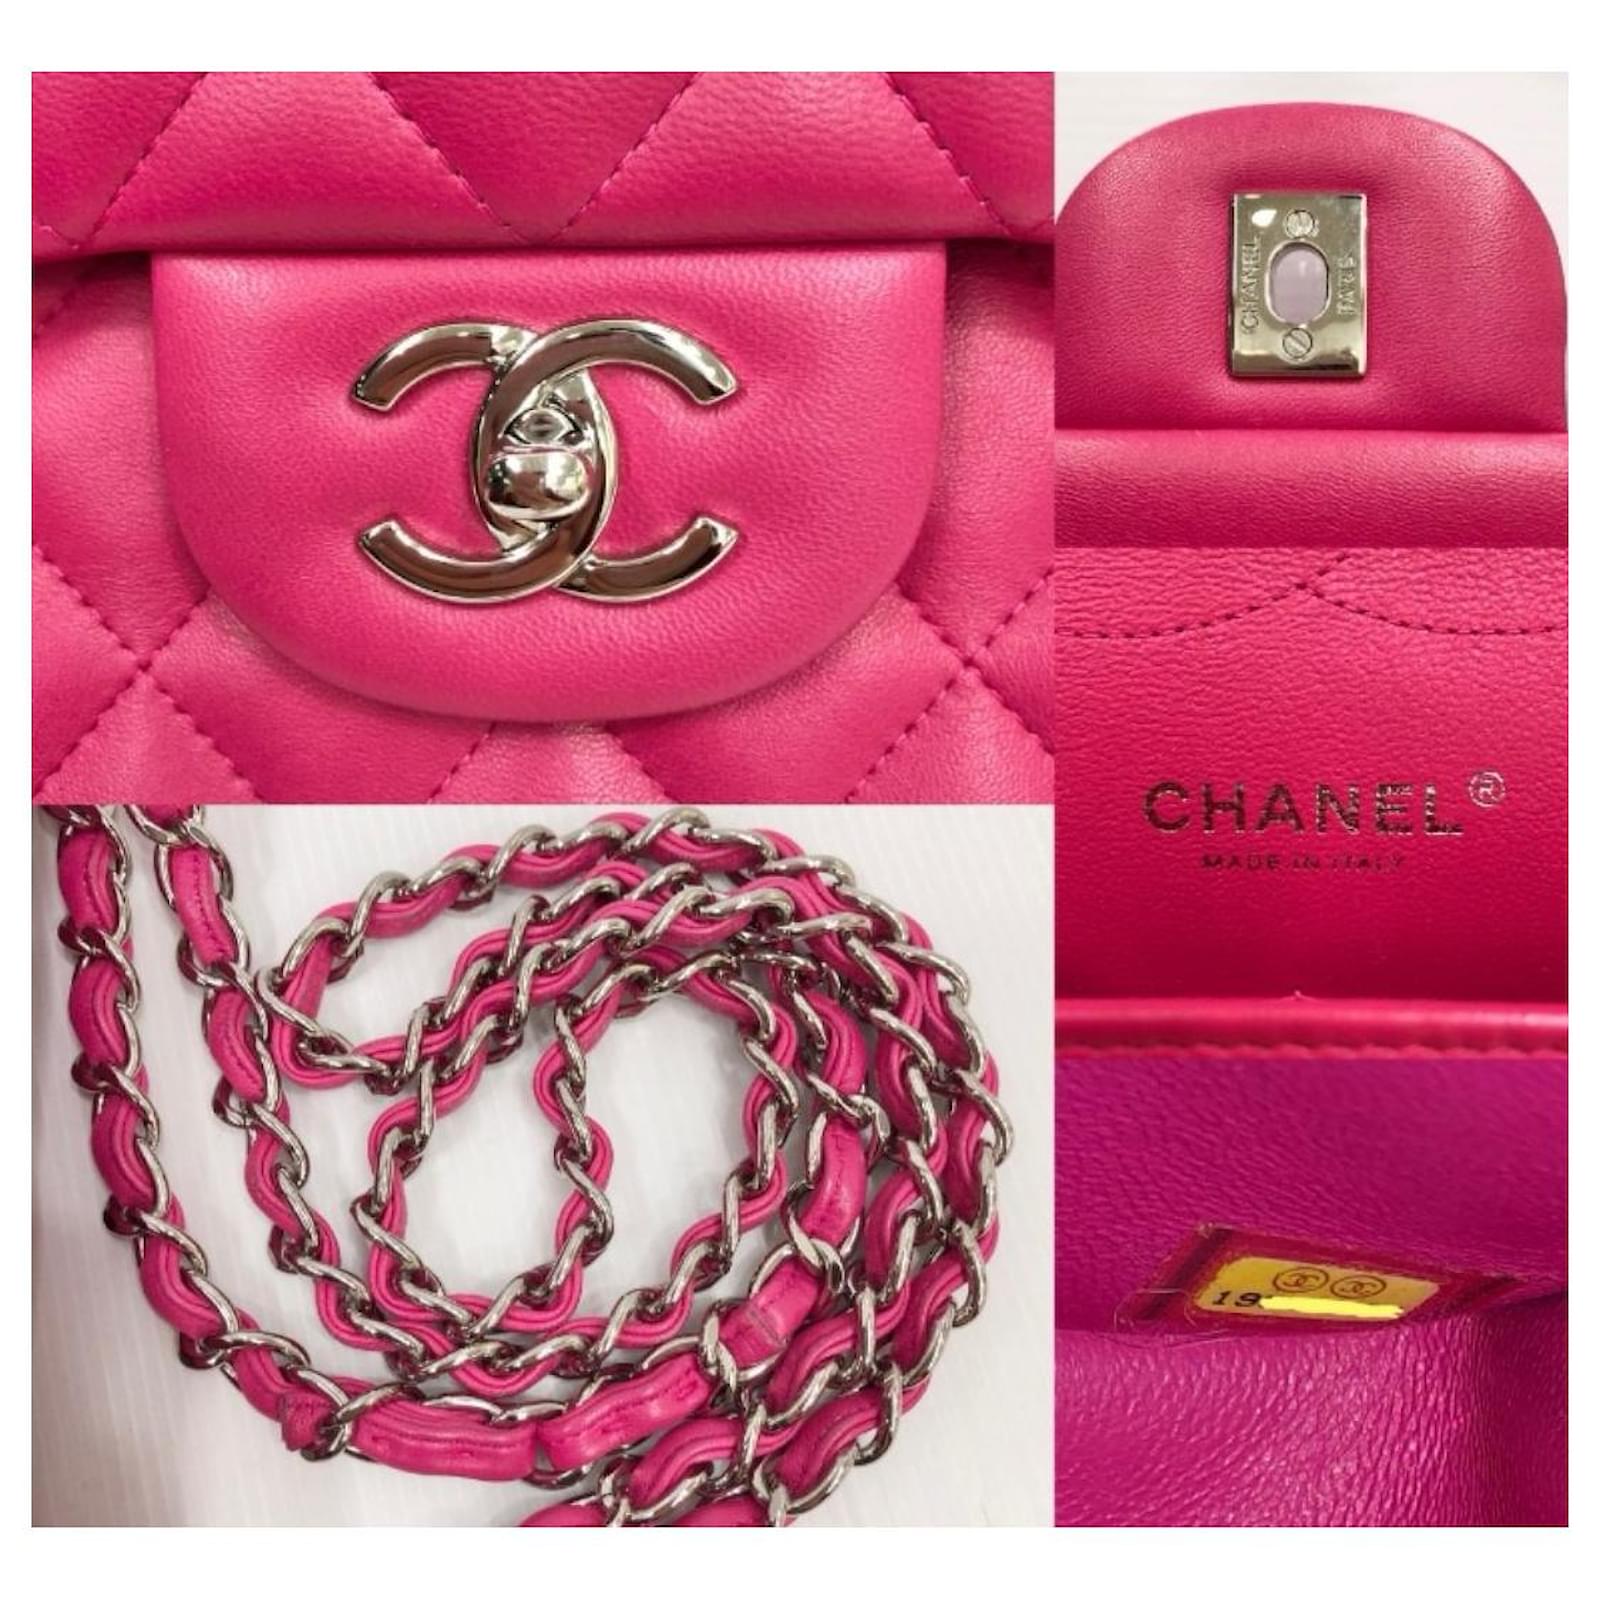 Timeless/classique leather handbag Chanel Pink in Leather - 30542823